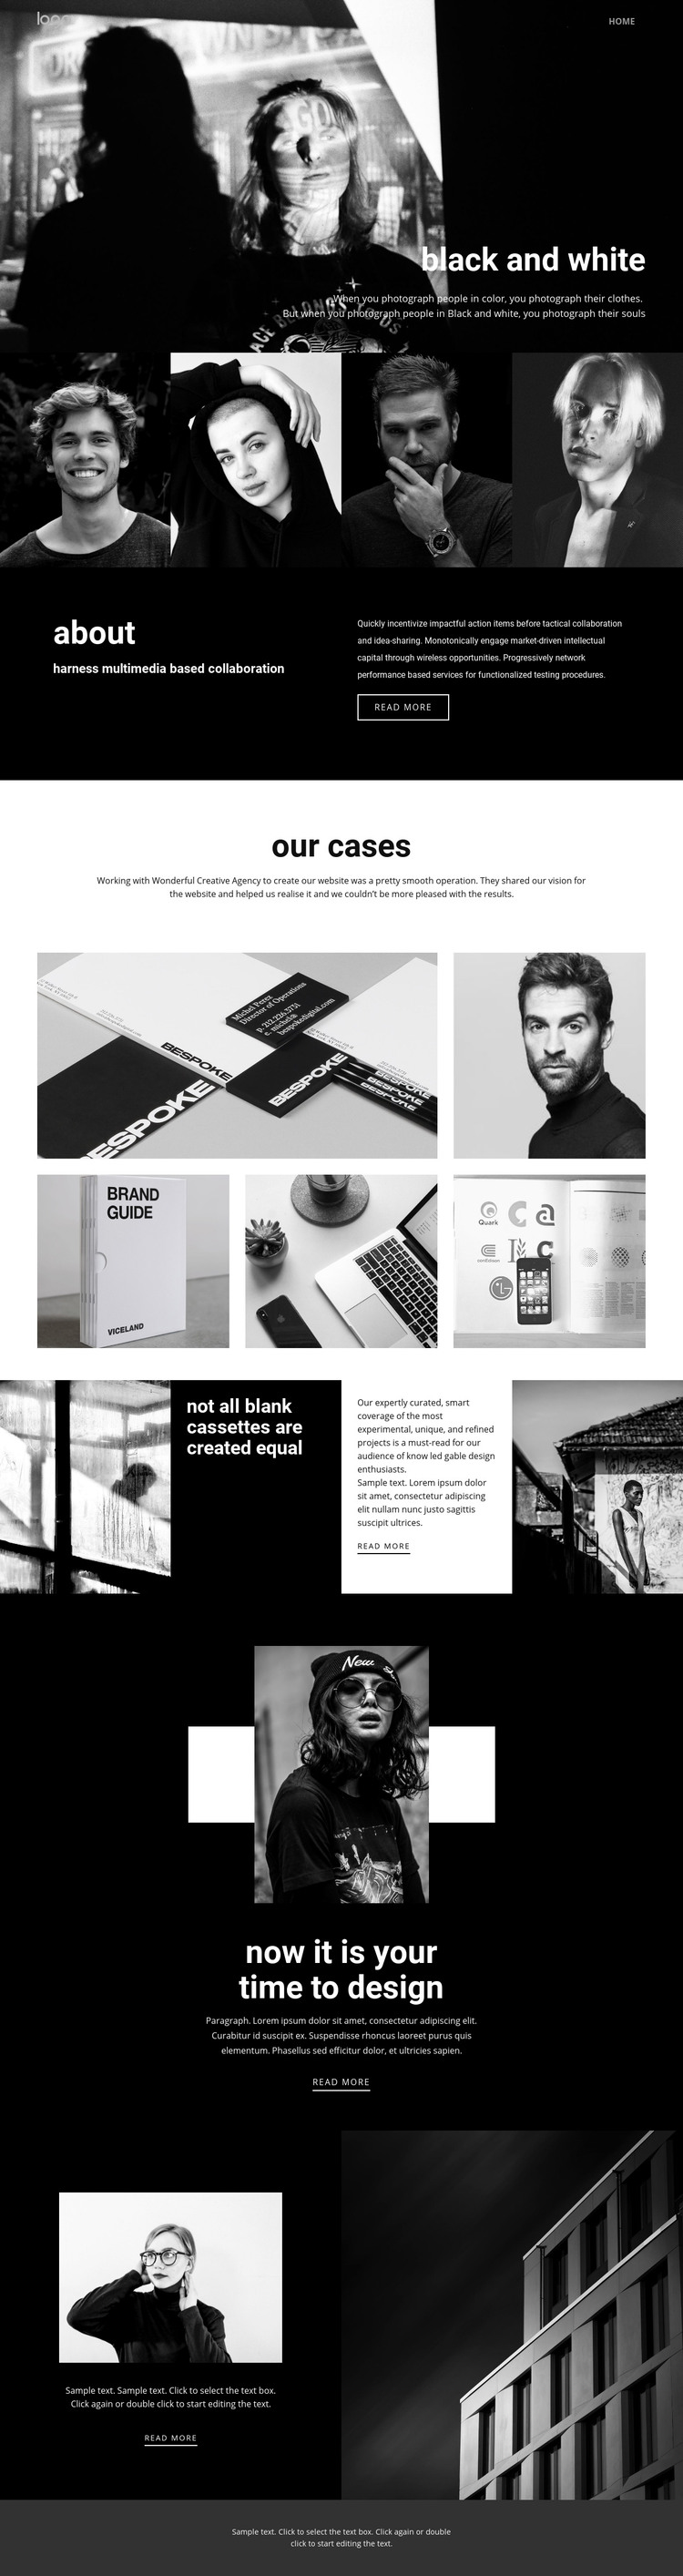 Black and white colors of art Homepage Design